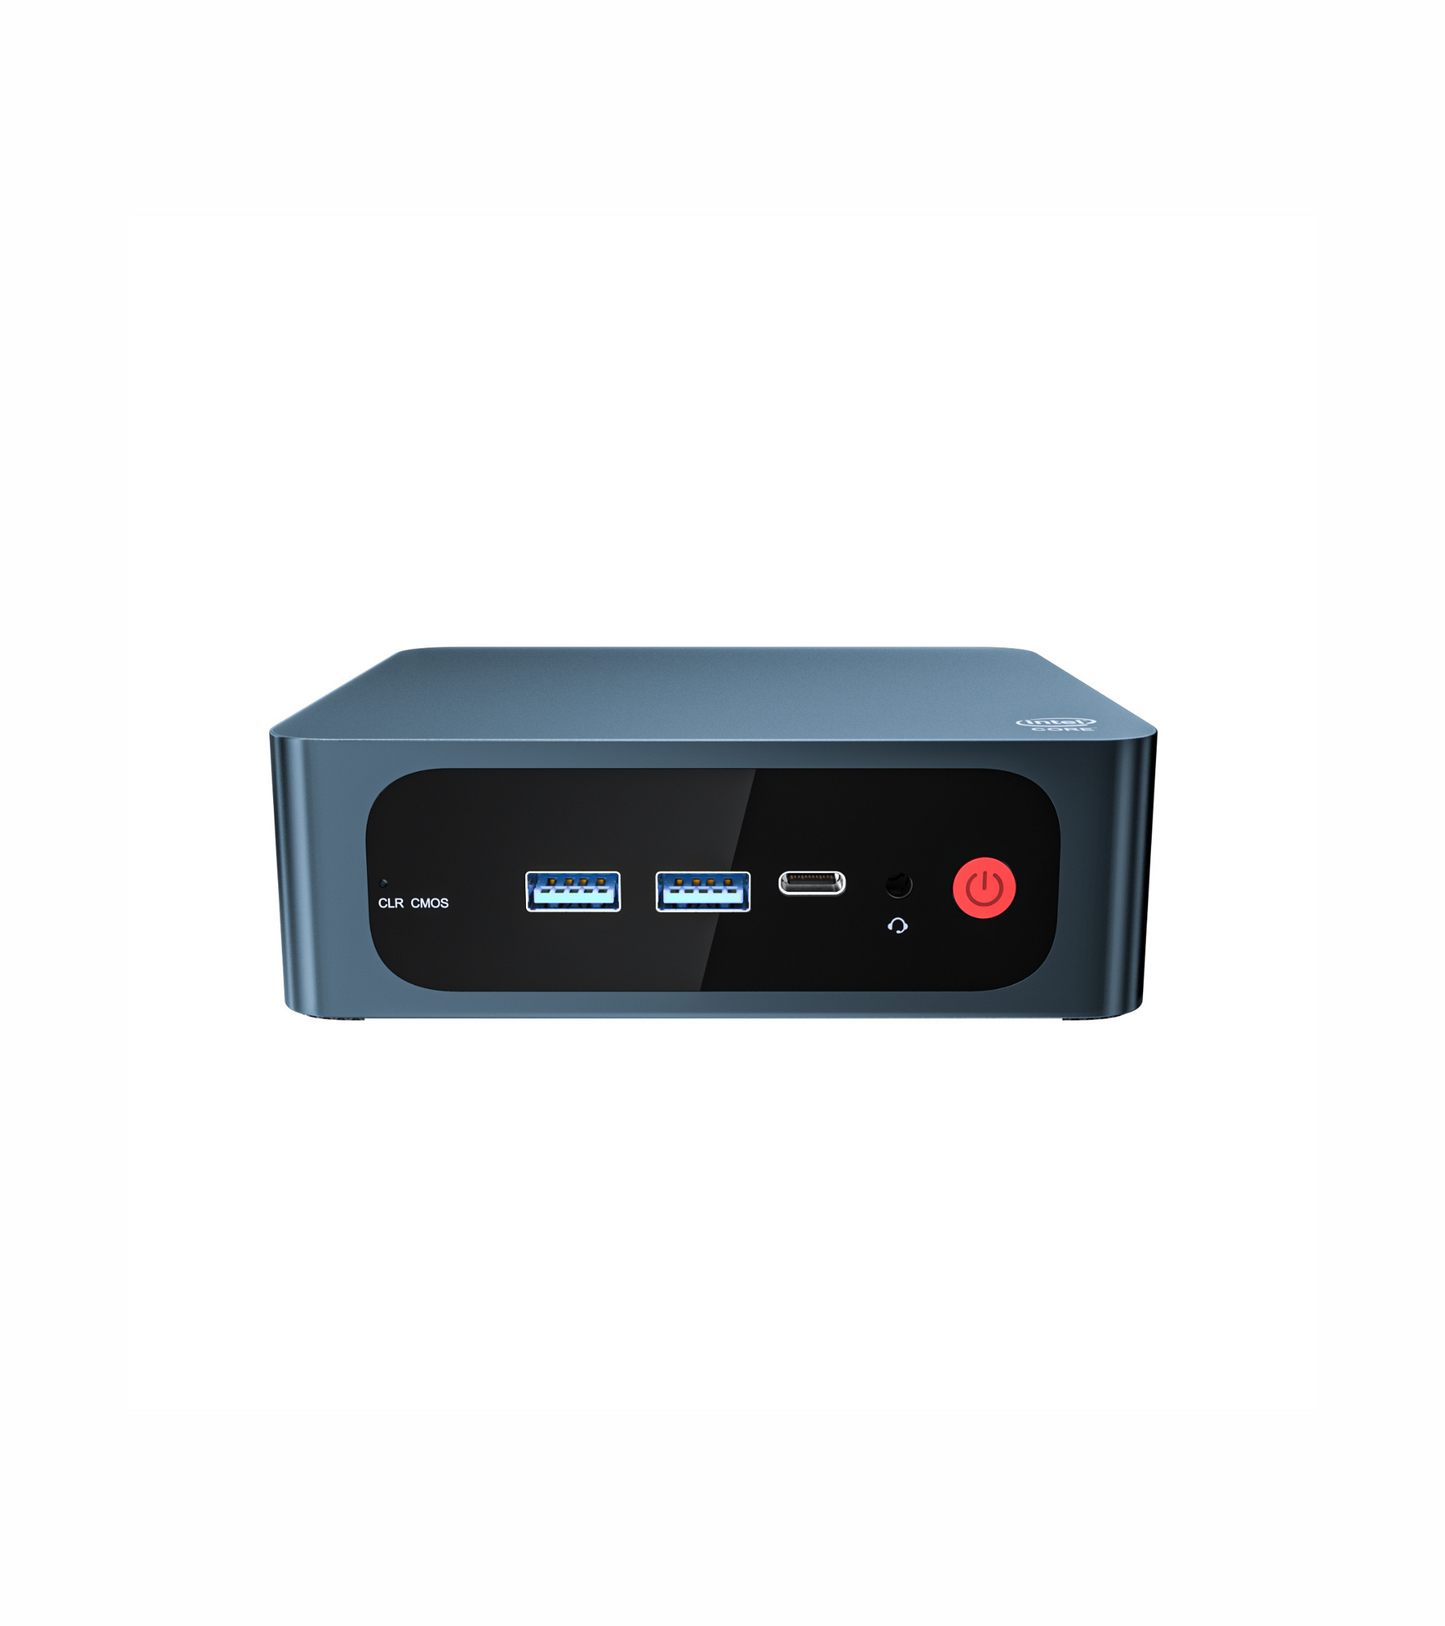  TRIGKEY Mini PC OS Desktop Intel i5-11320(4 Core, Up to 4.1GHz)  16G DDR4 1TB NVMe M.2 SSD Speed S Working Gaming Micro PC, Support Mini  Computer OS Pro, WiFi 5, BT